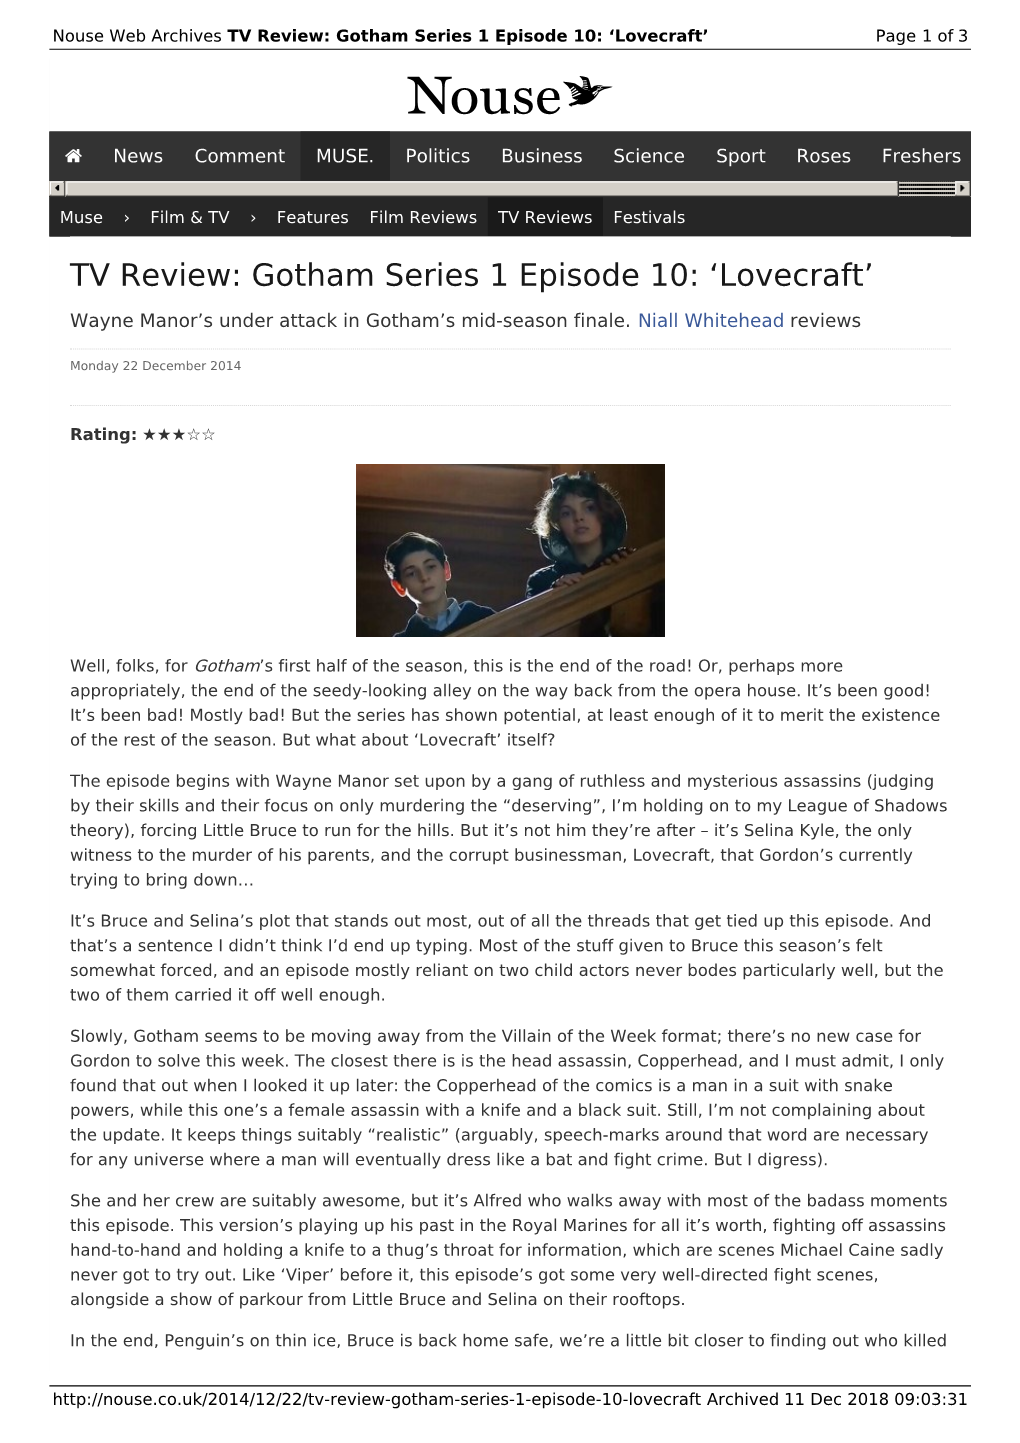 TV Review: Gotham Series 1 Episode 10: 'Lovecraft' | Nouse